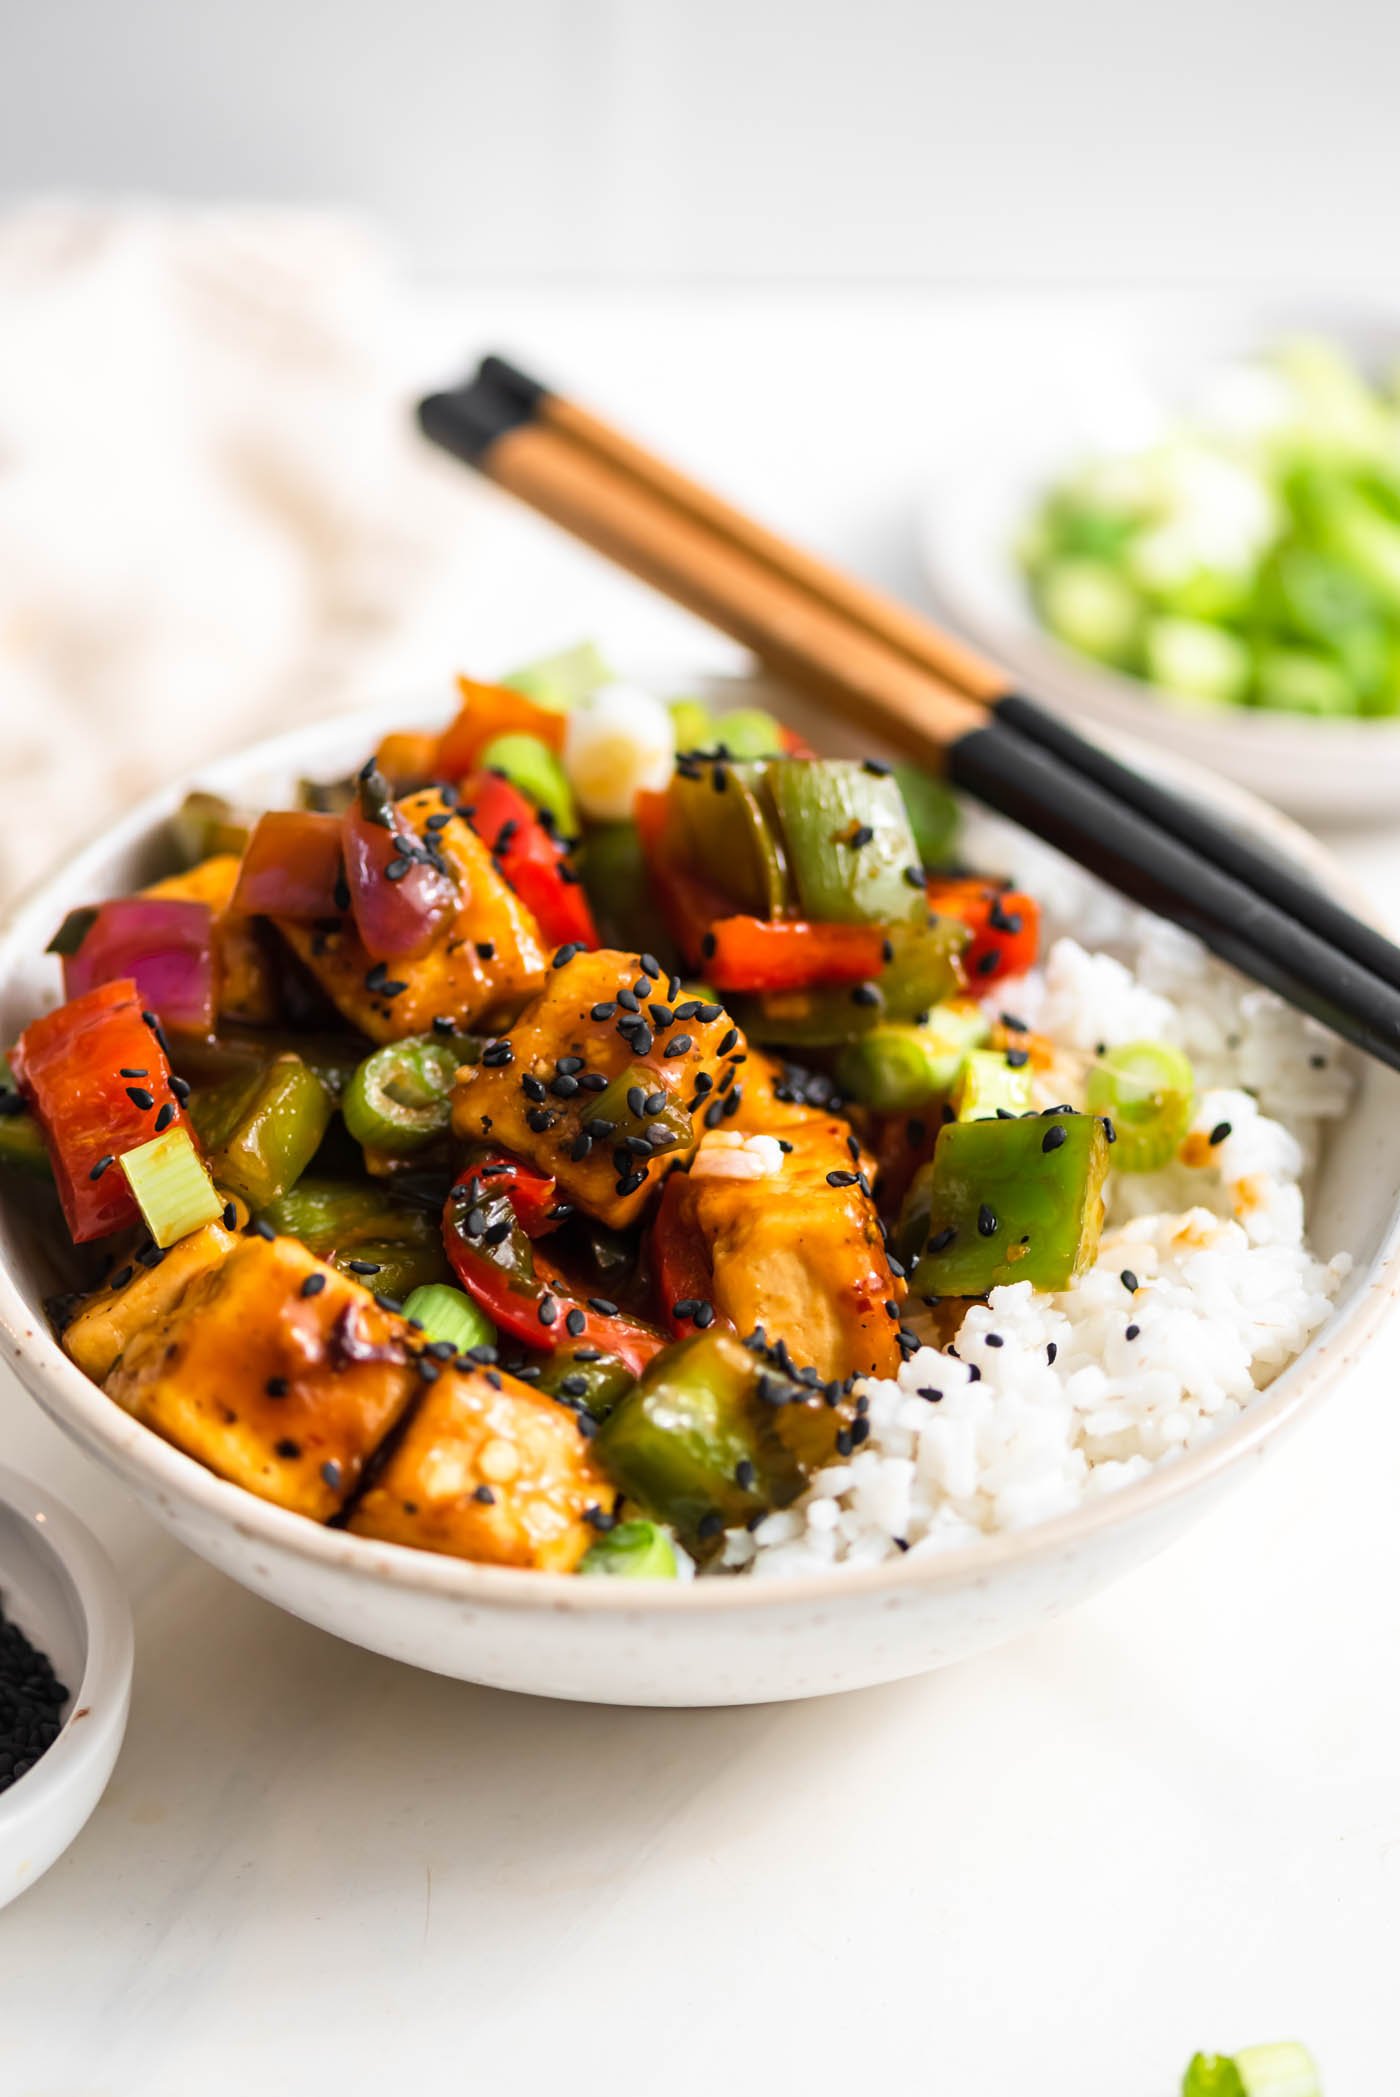 A pair of chopsticks rests on a bowl of sweet and sour stir fry with vegetables served over rice and topped with sesame seeds and green onion.